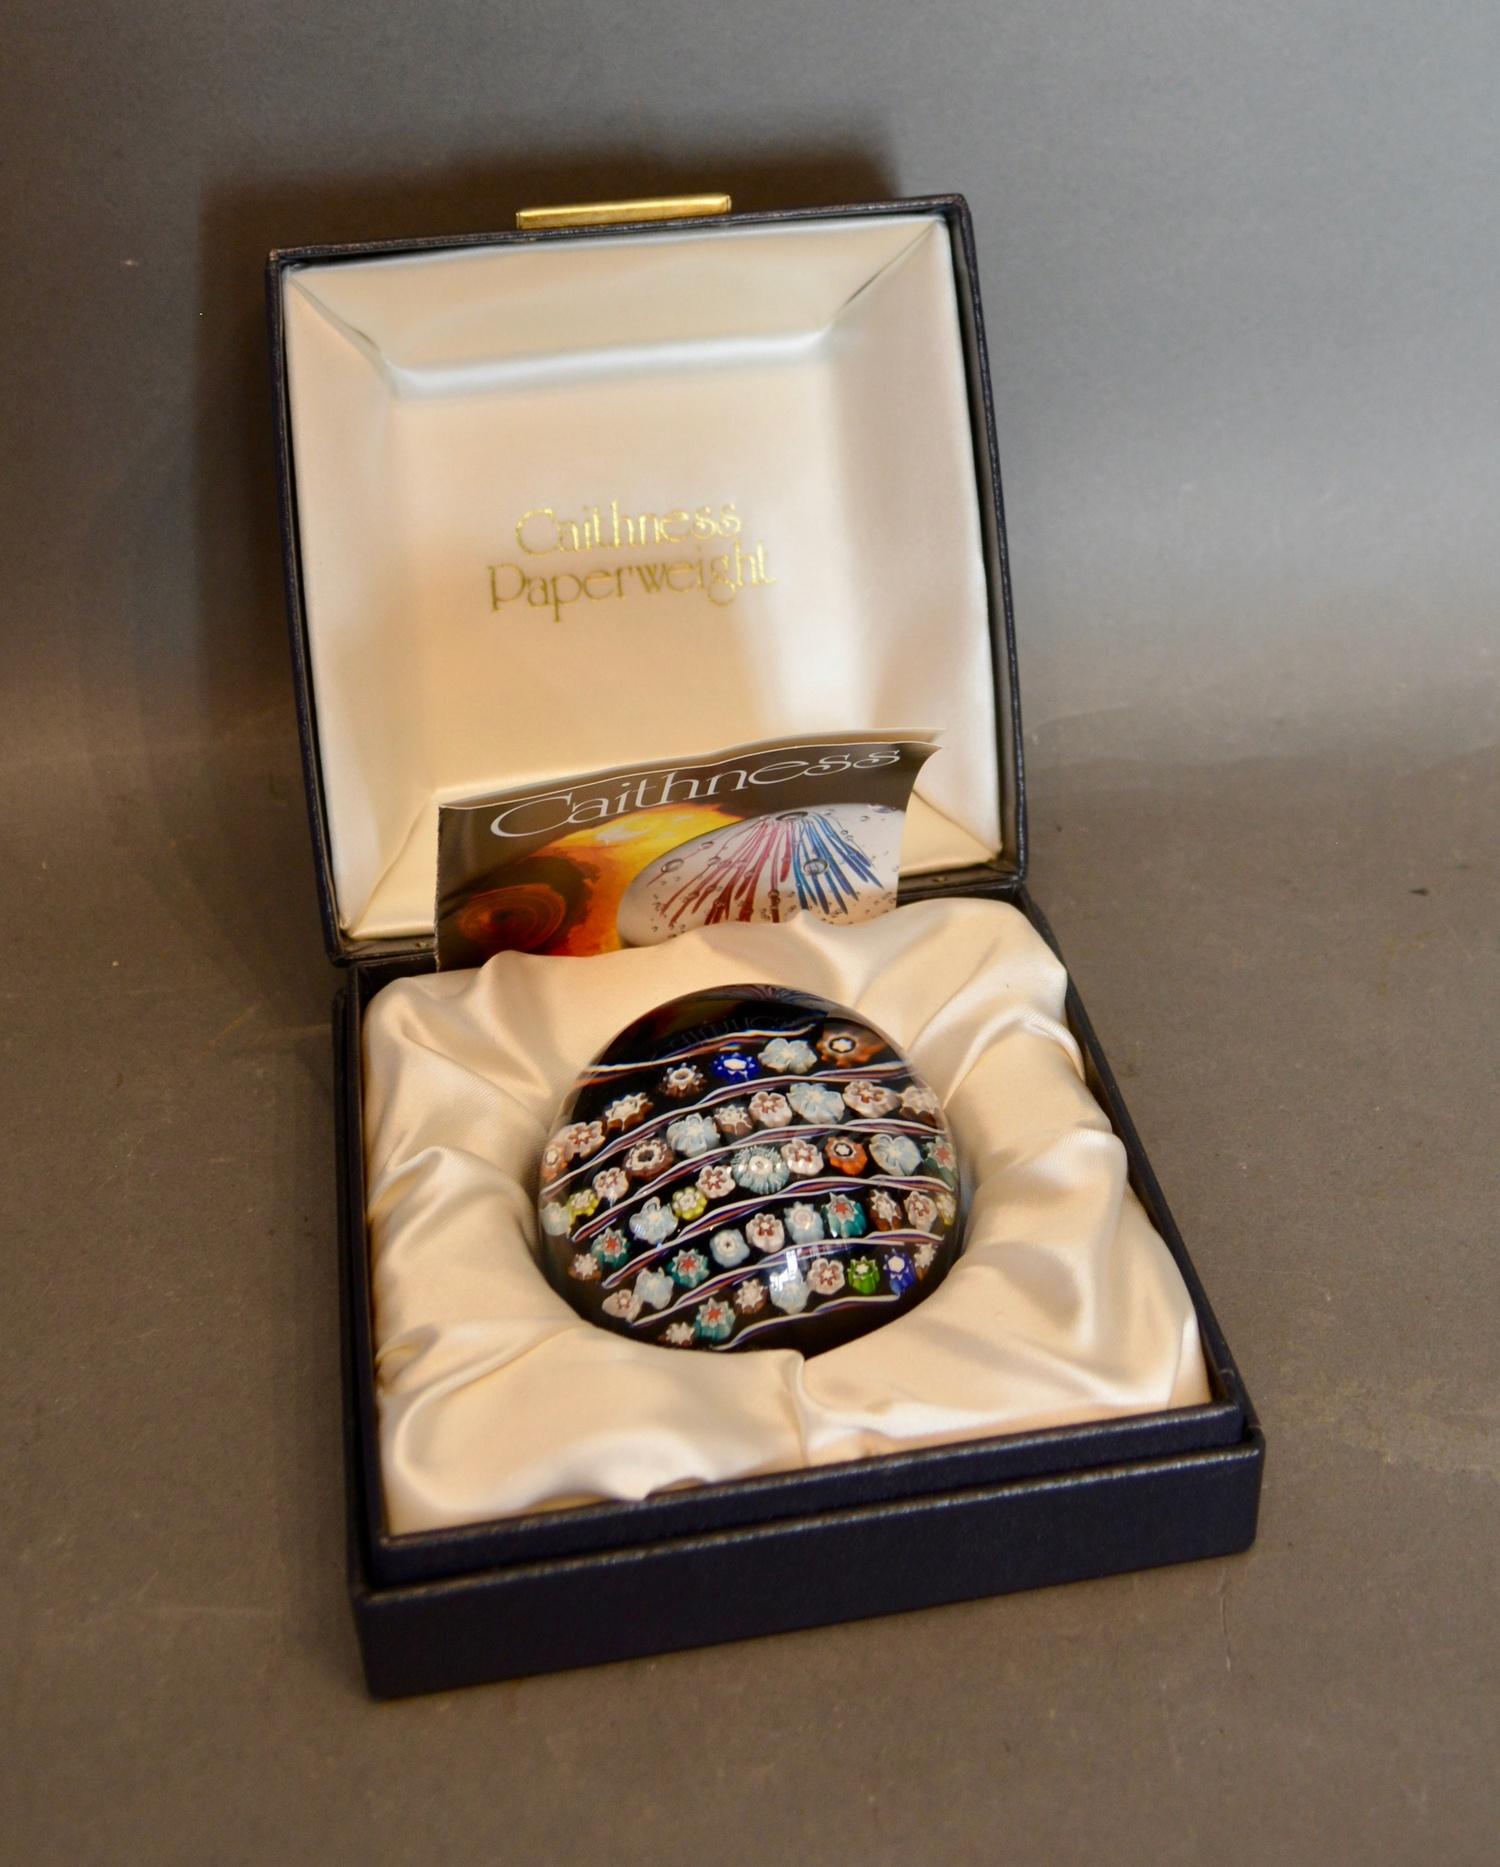 A Limited Edition Caithness Paperweight by Colin Terry within original box